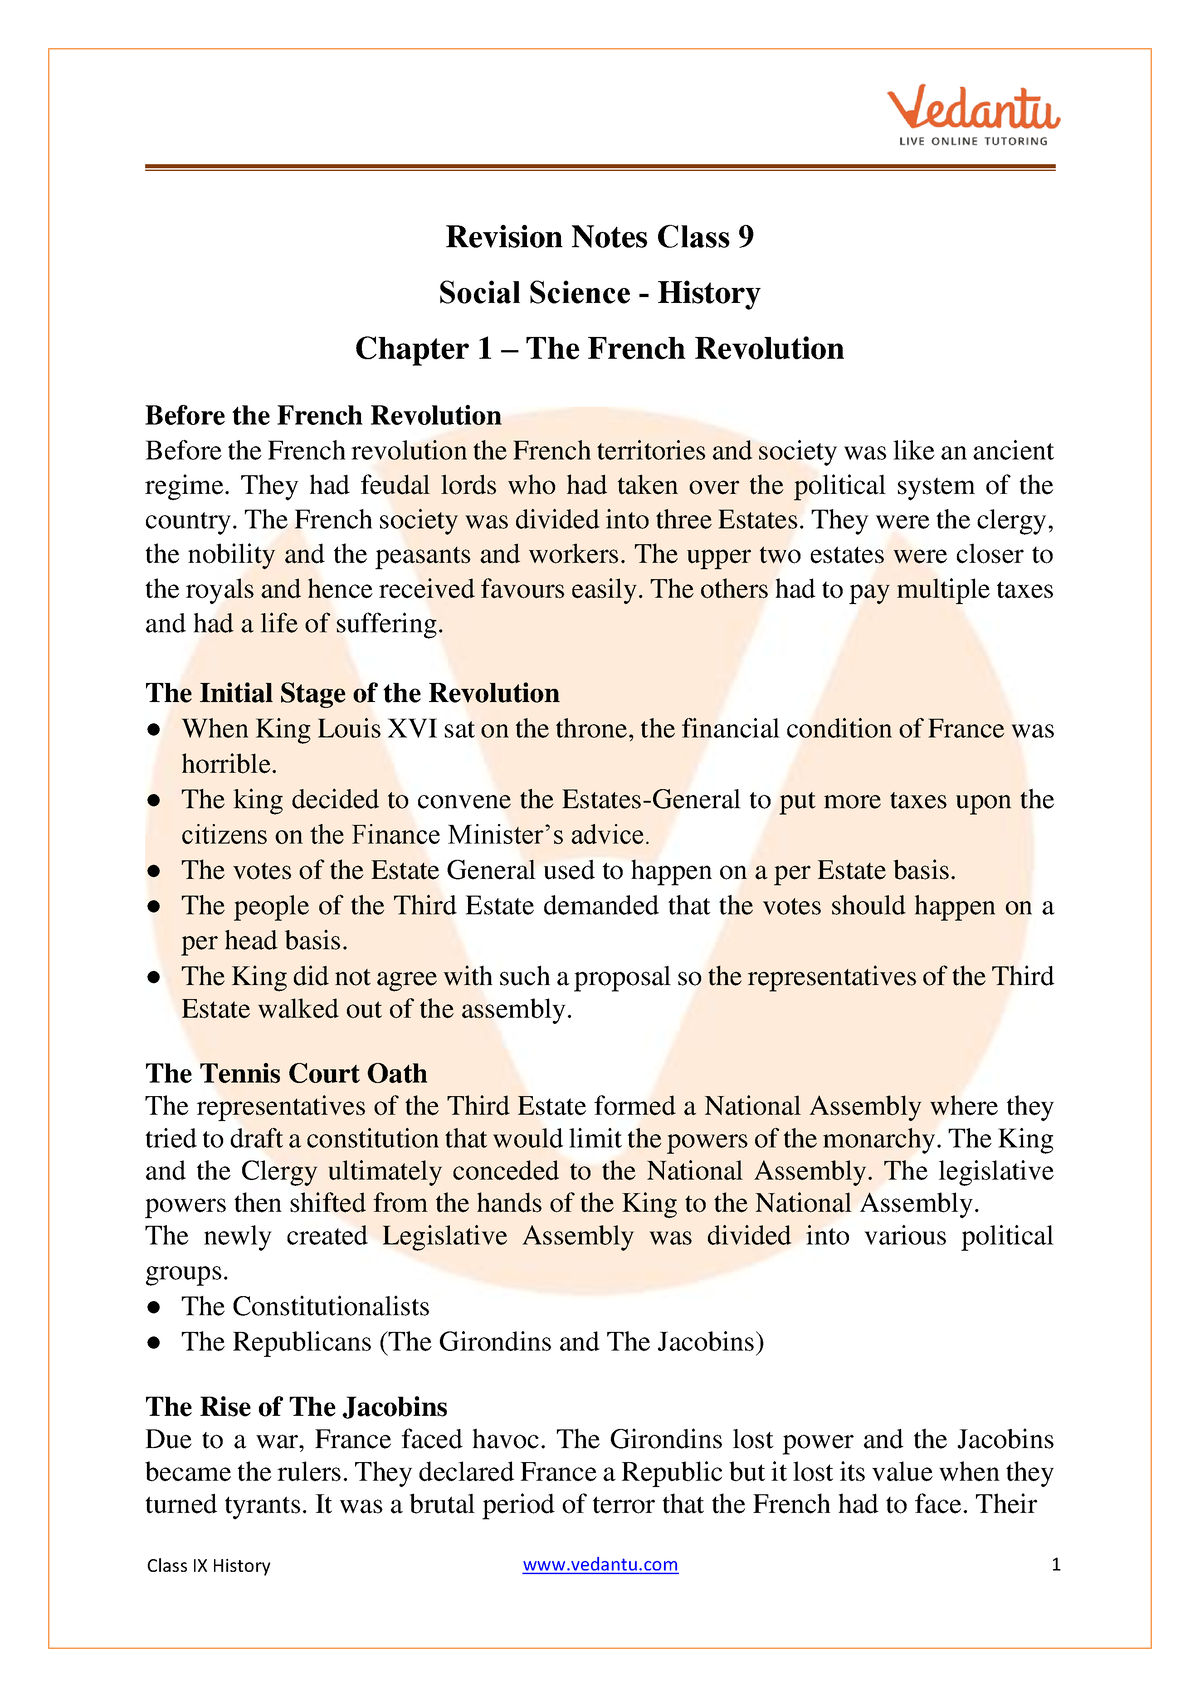 Cbse Class 9 History Chapter 1 Notes The French Revolution Class Ix History Vedantu 1 